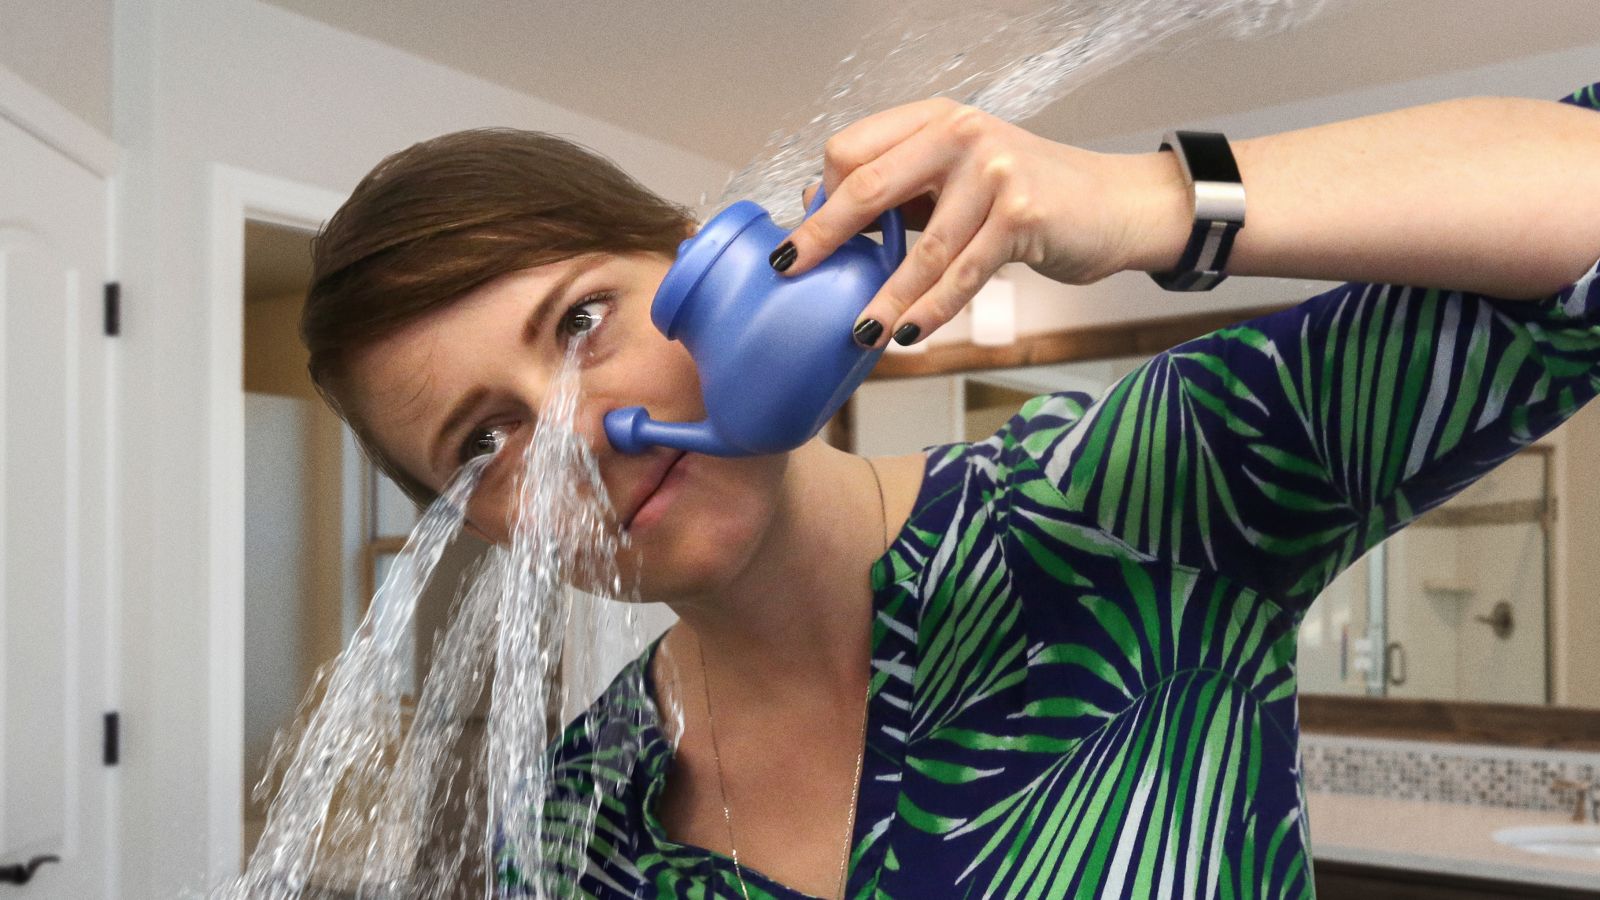 25,000 Neti Pots Recalled After Defect Causes Water To Shoot Out Of Eyes, E...